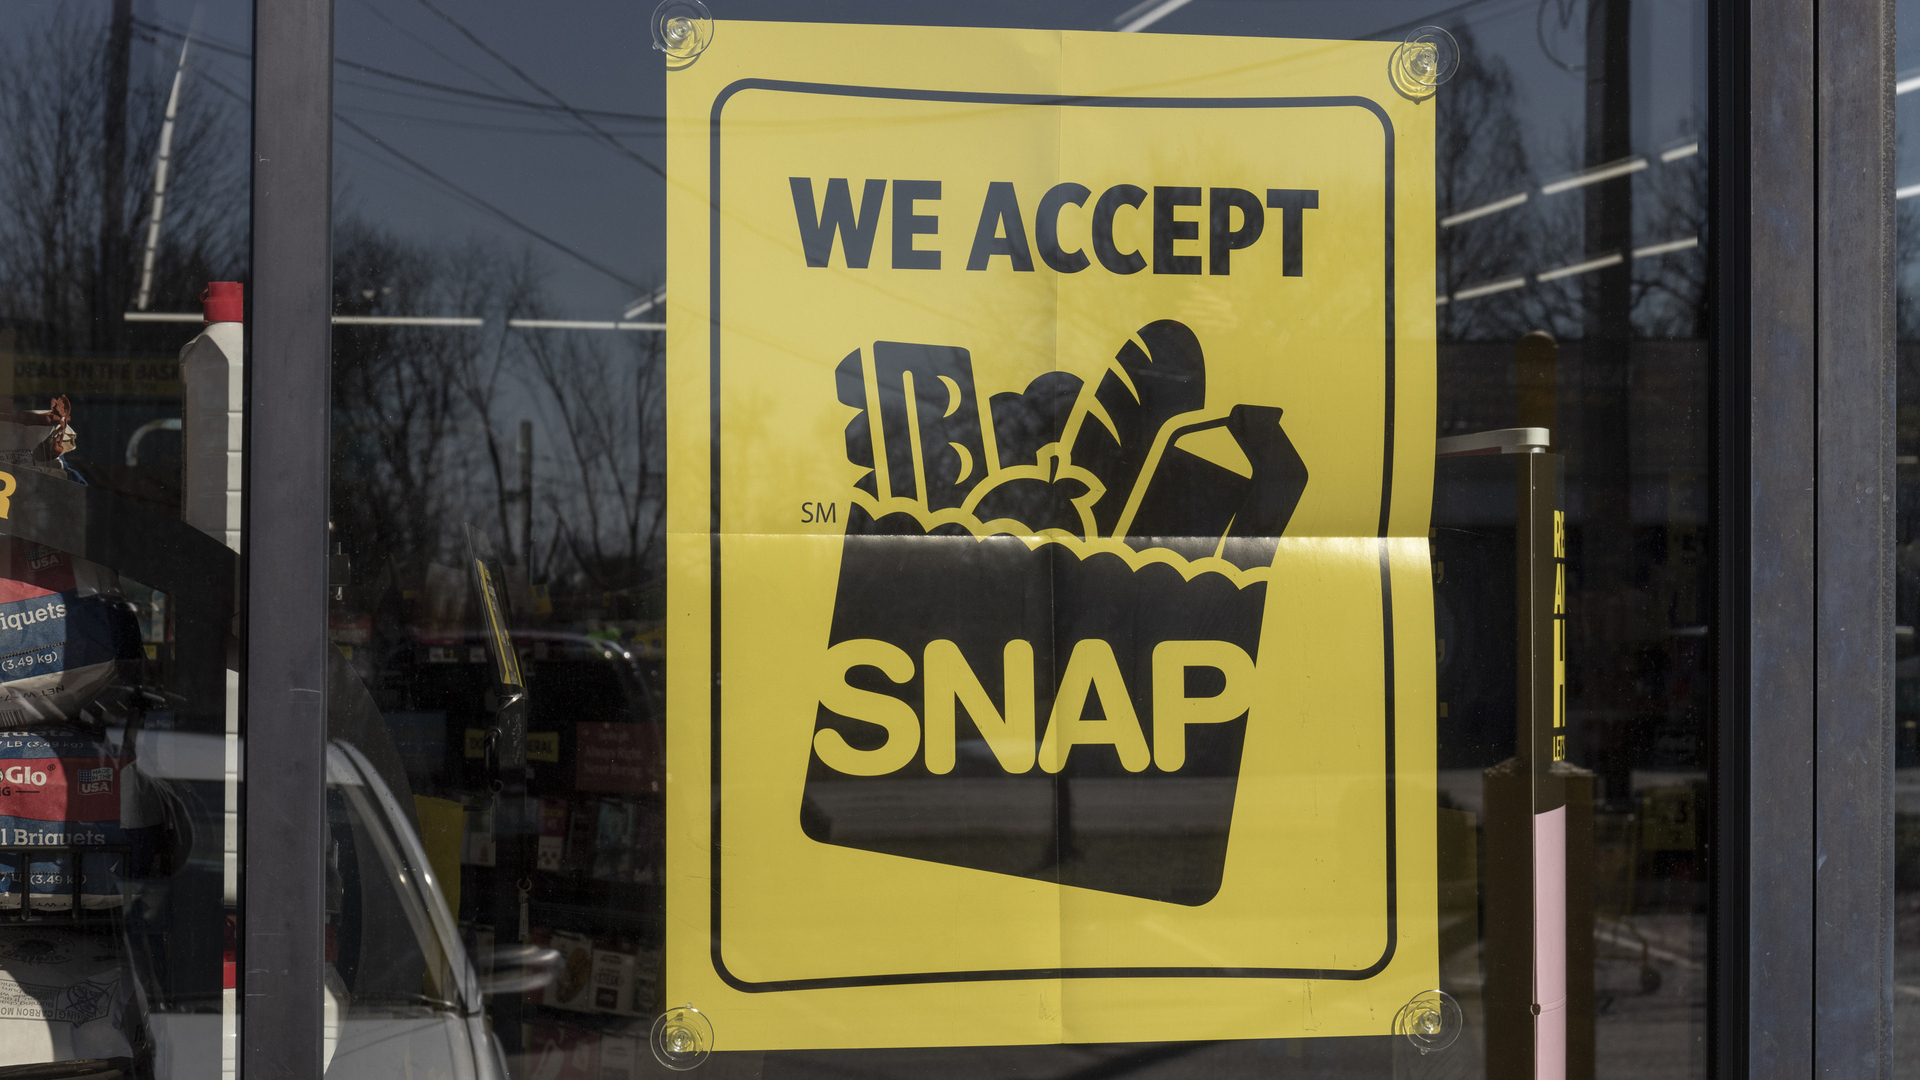 What Can SNAP Buy?